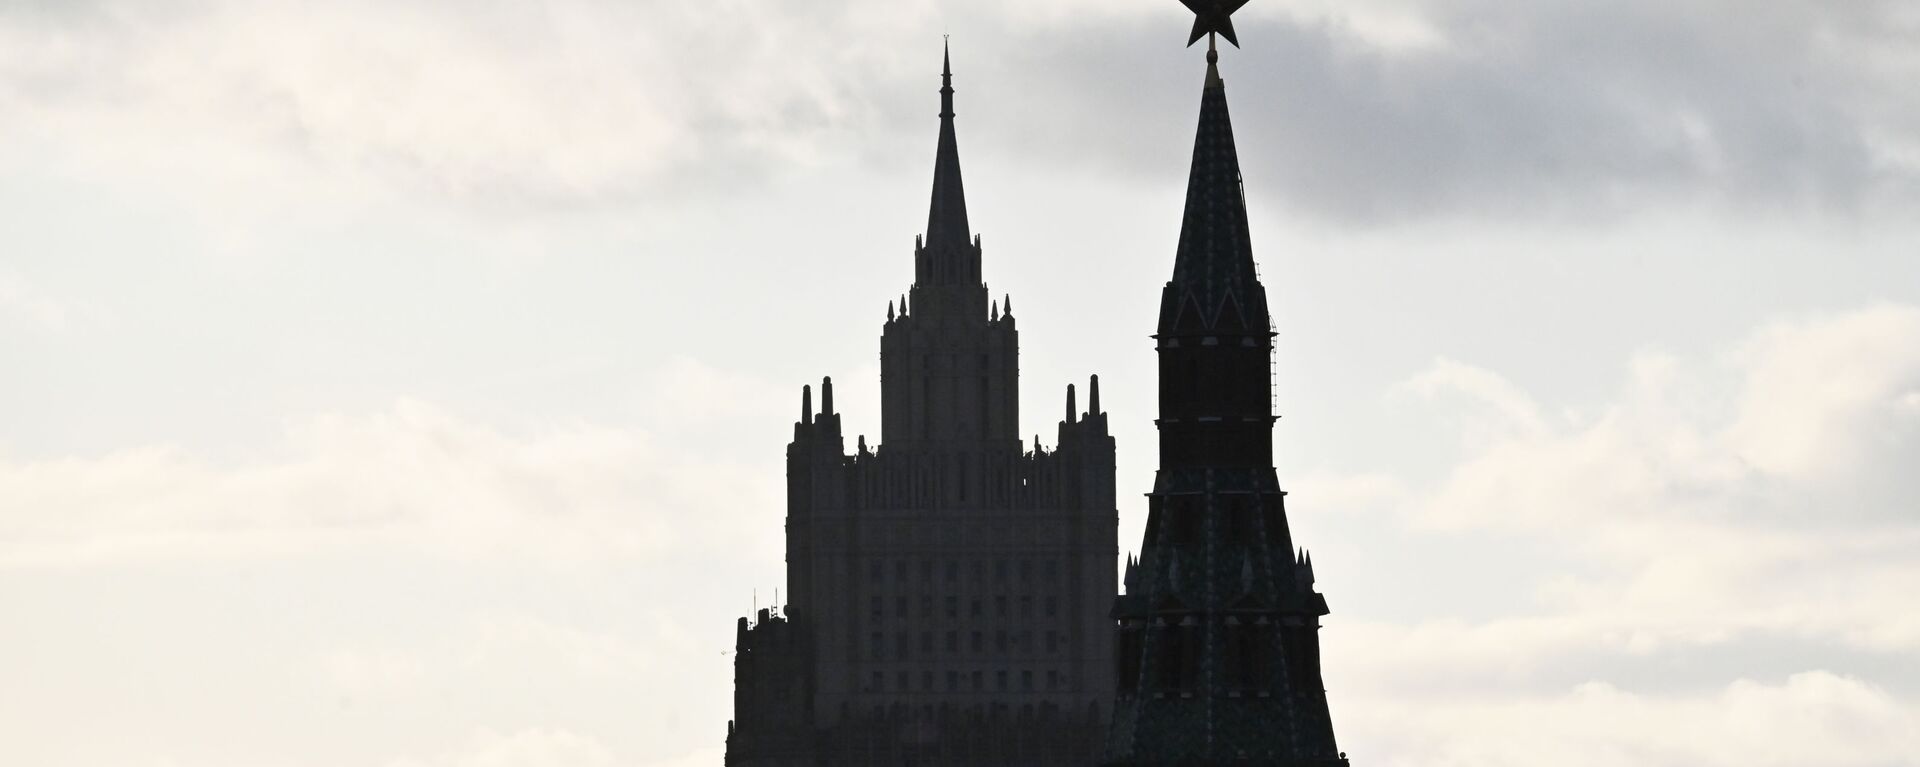 A view of the Russian Foreign Ministry and one of the Kremlin towers - Sputnik International, 1920, 16.04.2021